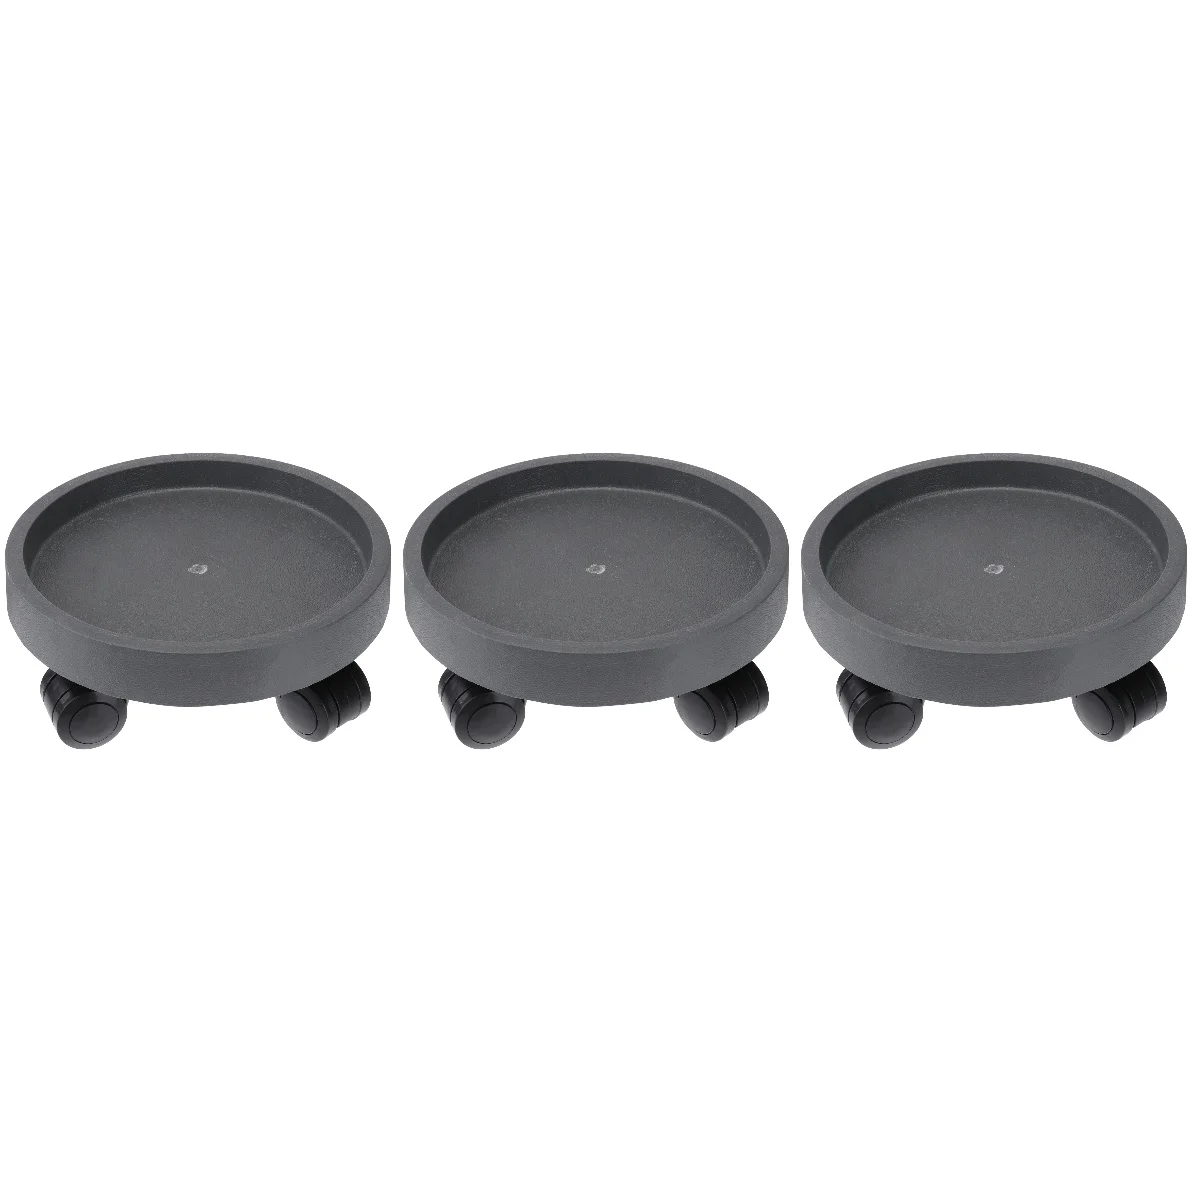 

Plantpotcaster Stand Planter Flower Wheel Rolling Round Tray Saucer Base Plate Mover Indoor Roller Wheels Movablecaddies Trays